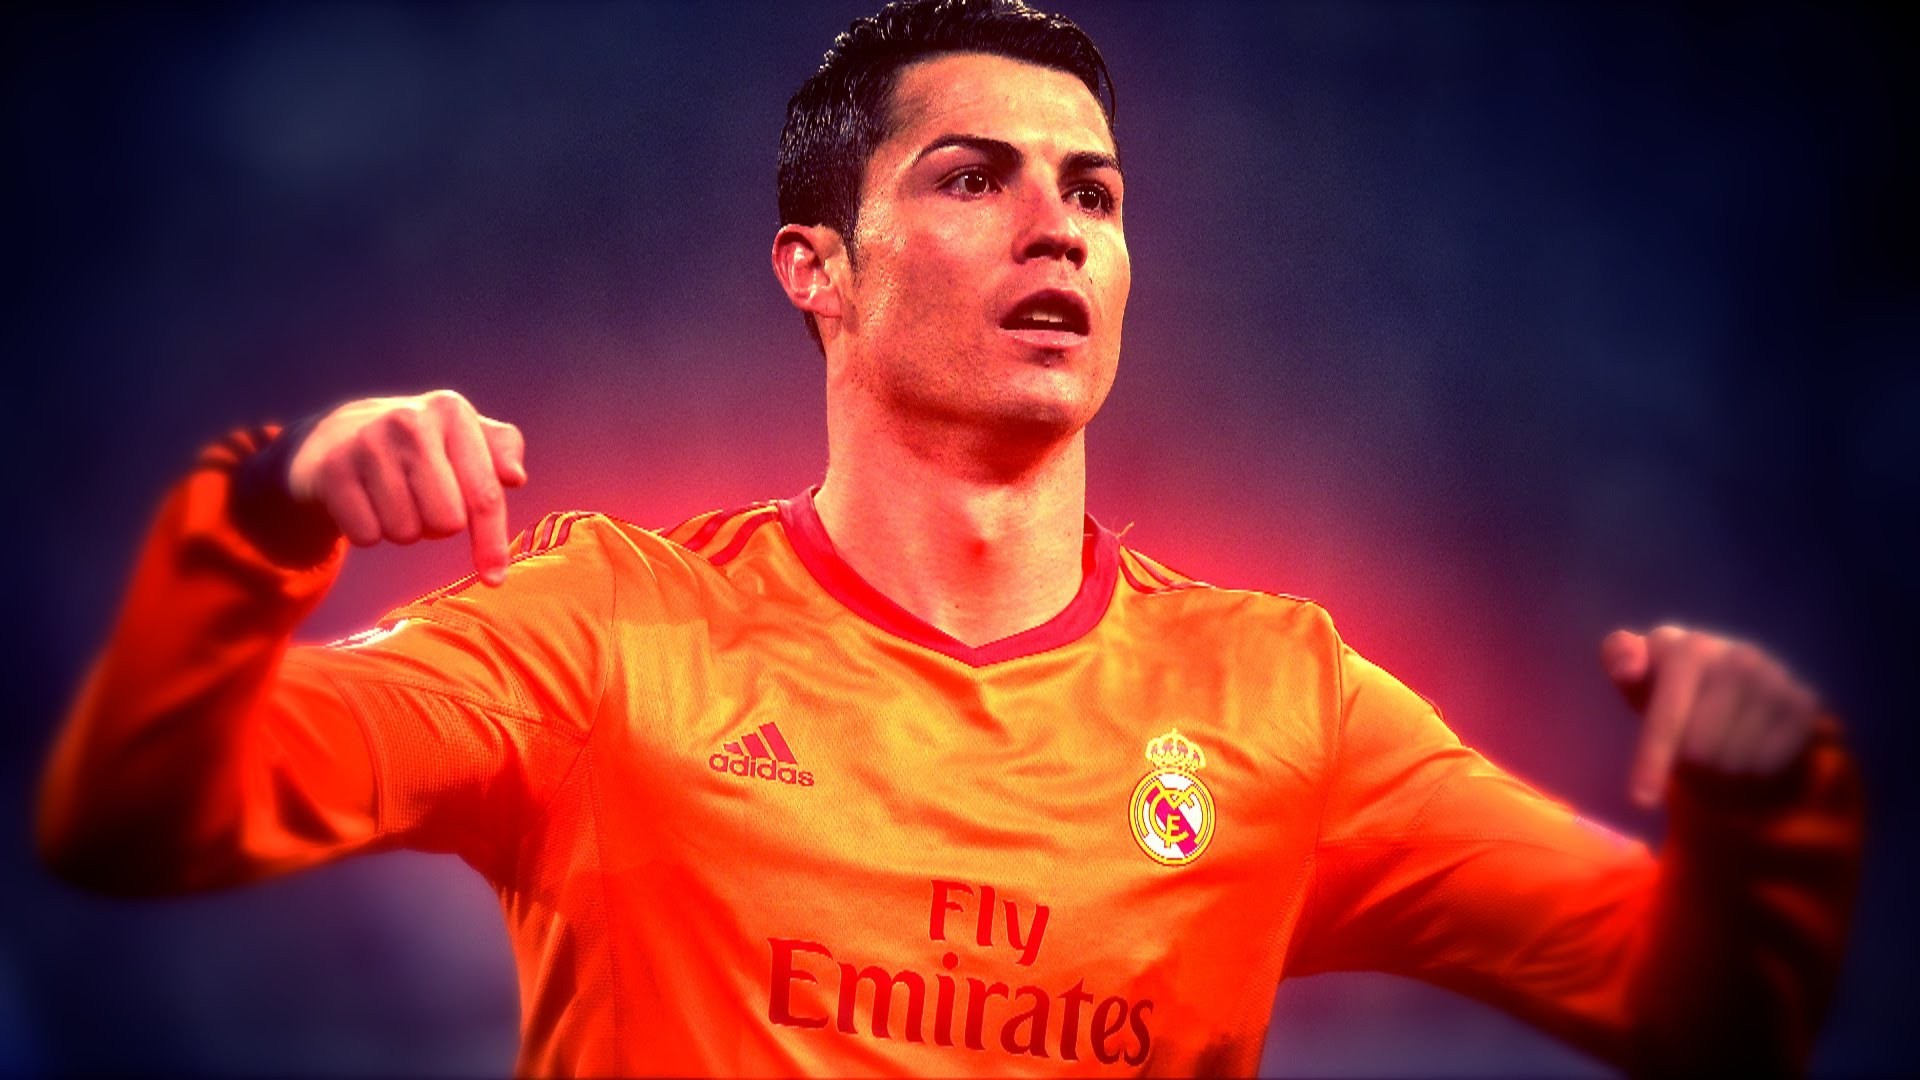 Collection of Ronaldo Wallpapers on HDWallpapers 1080675 Cristiano Ronaldo Wallpaper Hd 61 Wallpapers